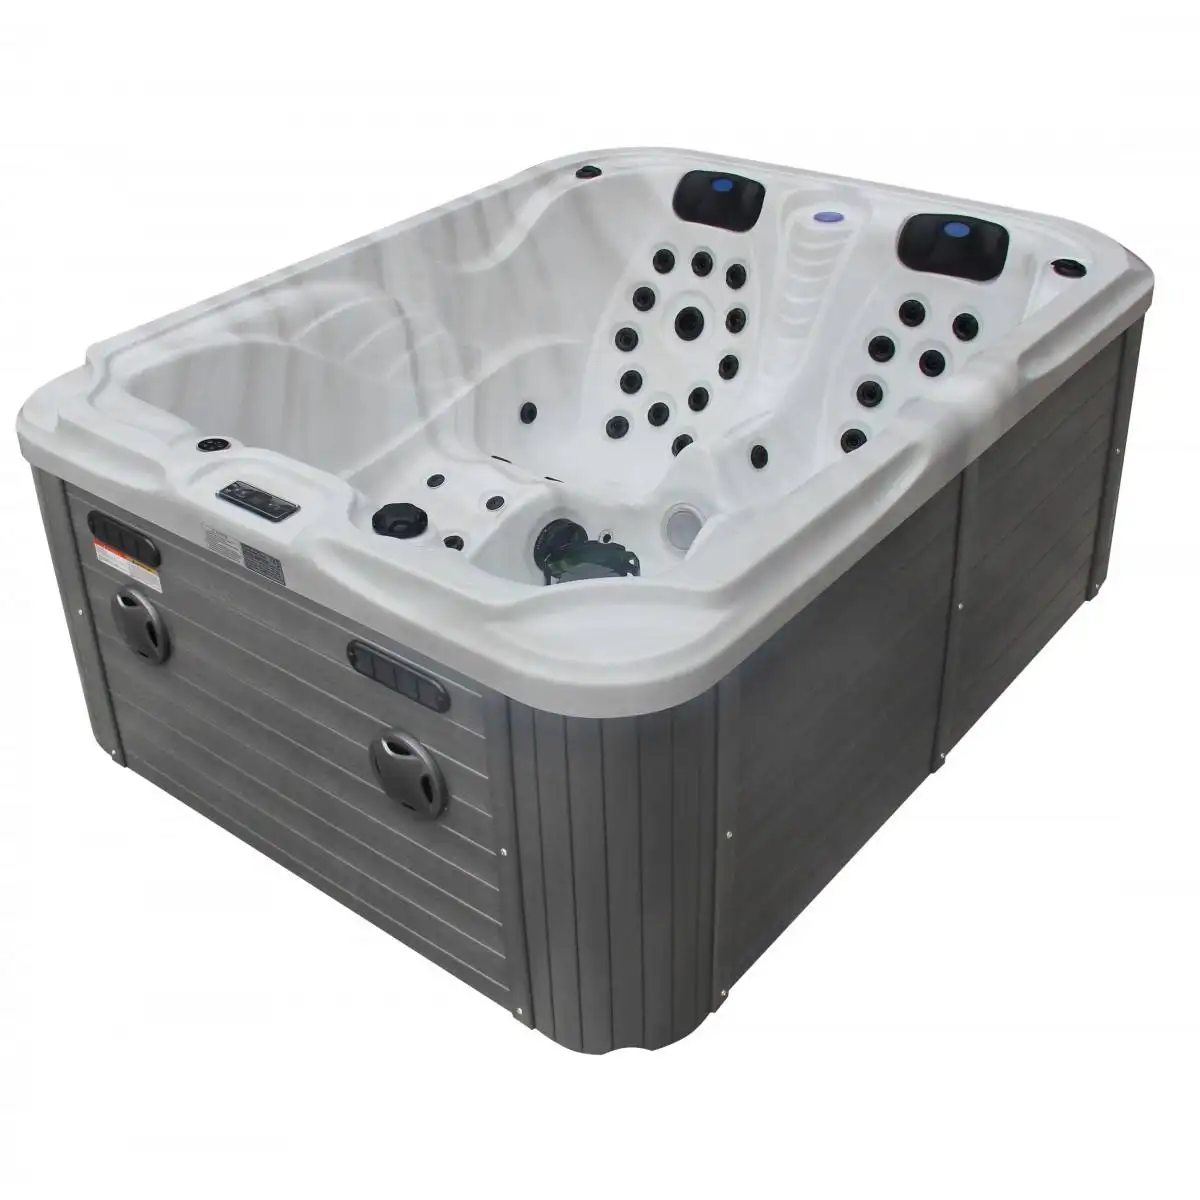 Relaxation Anywhere: Wholesale Indoor Hot Tub Portable Air Bubble Massage for 2-6 People